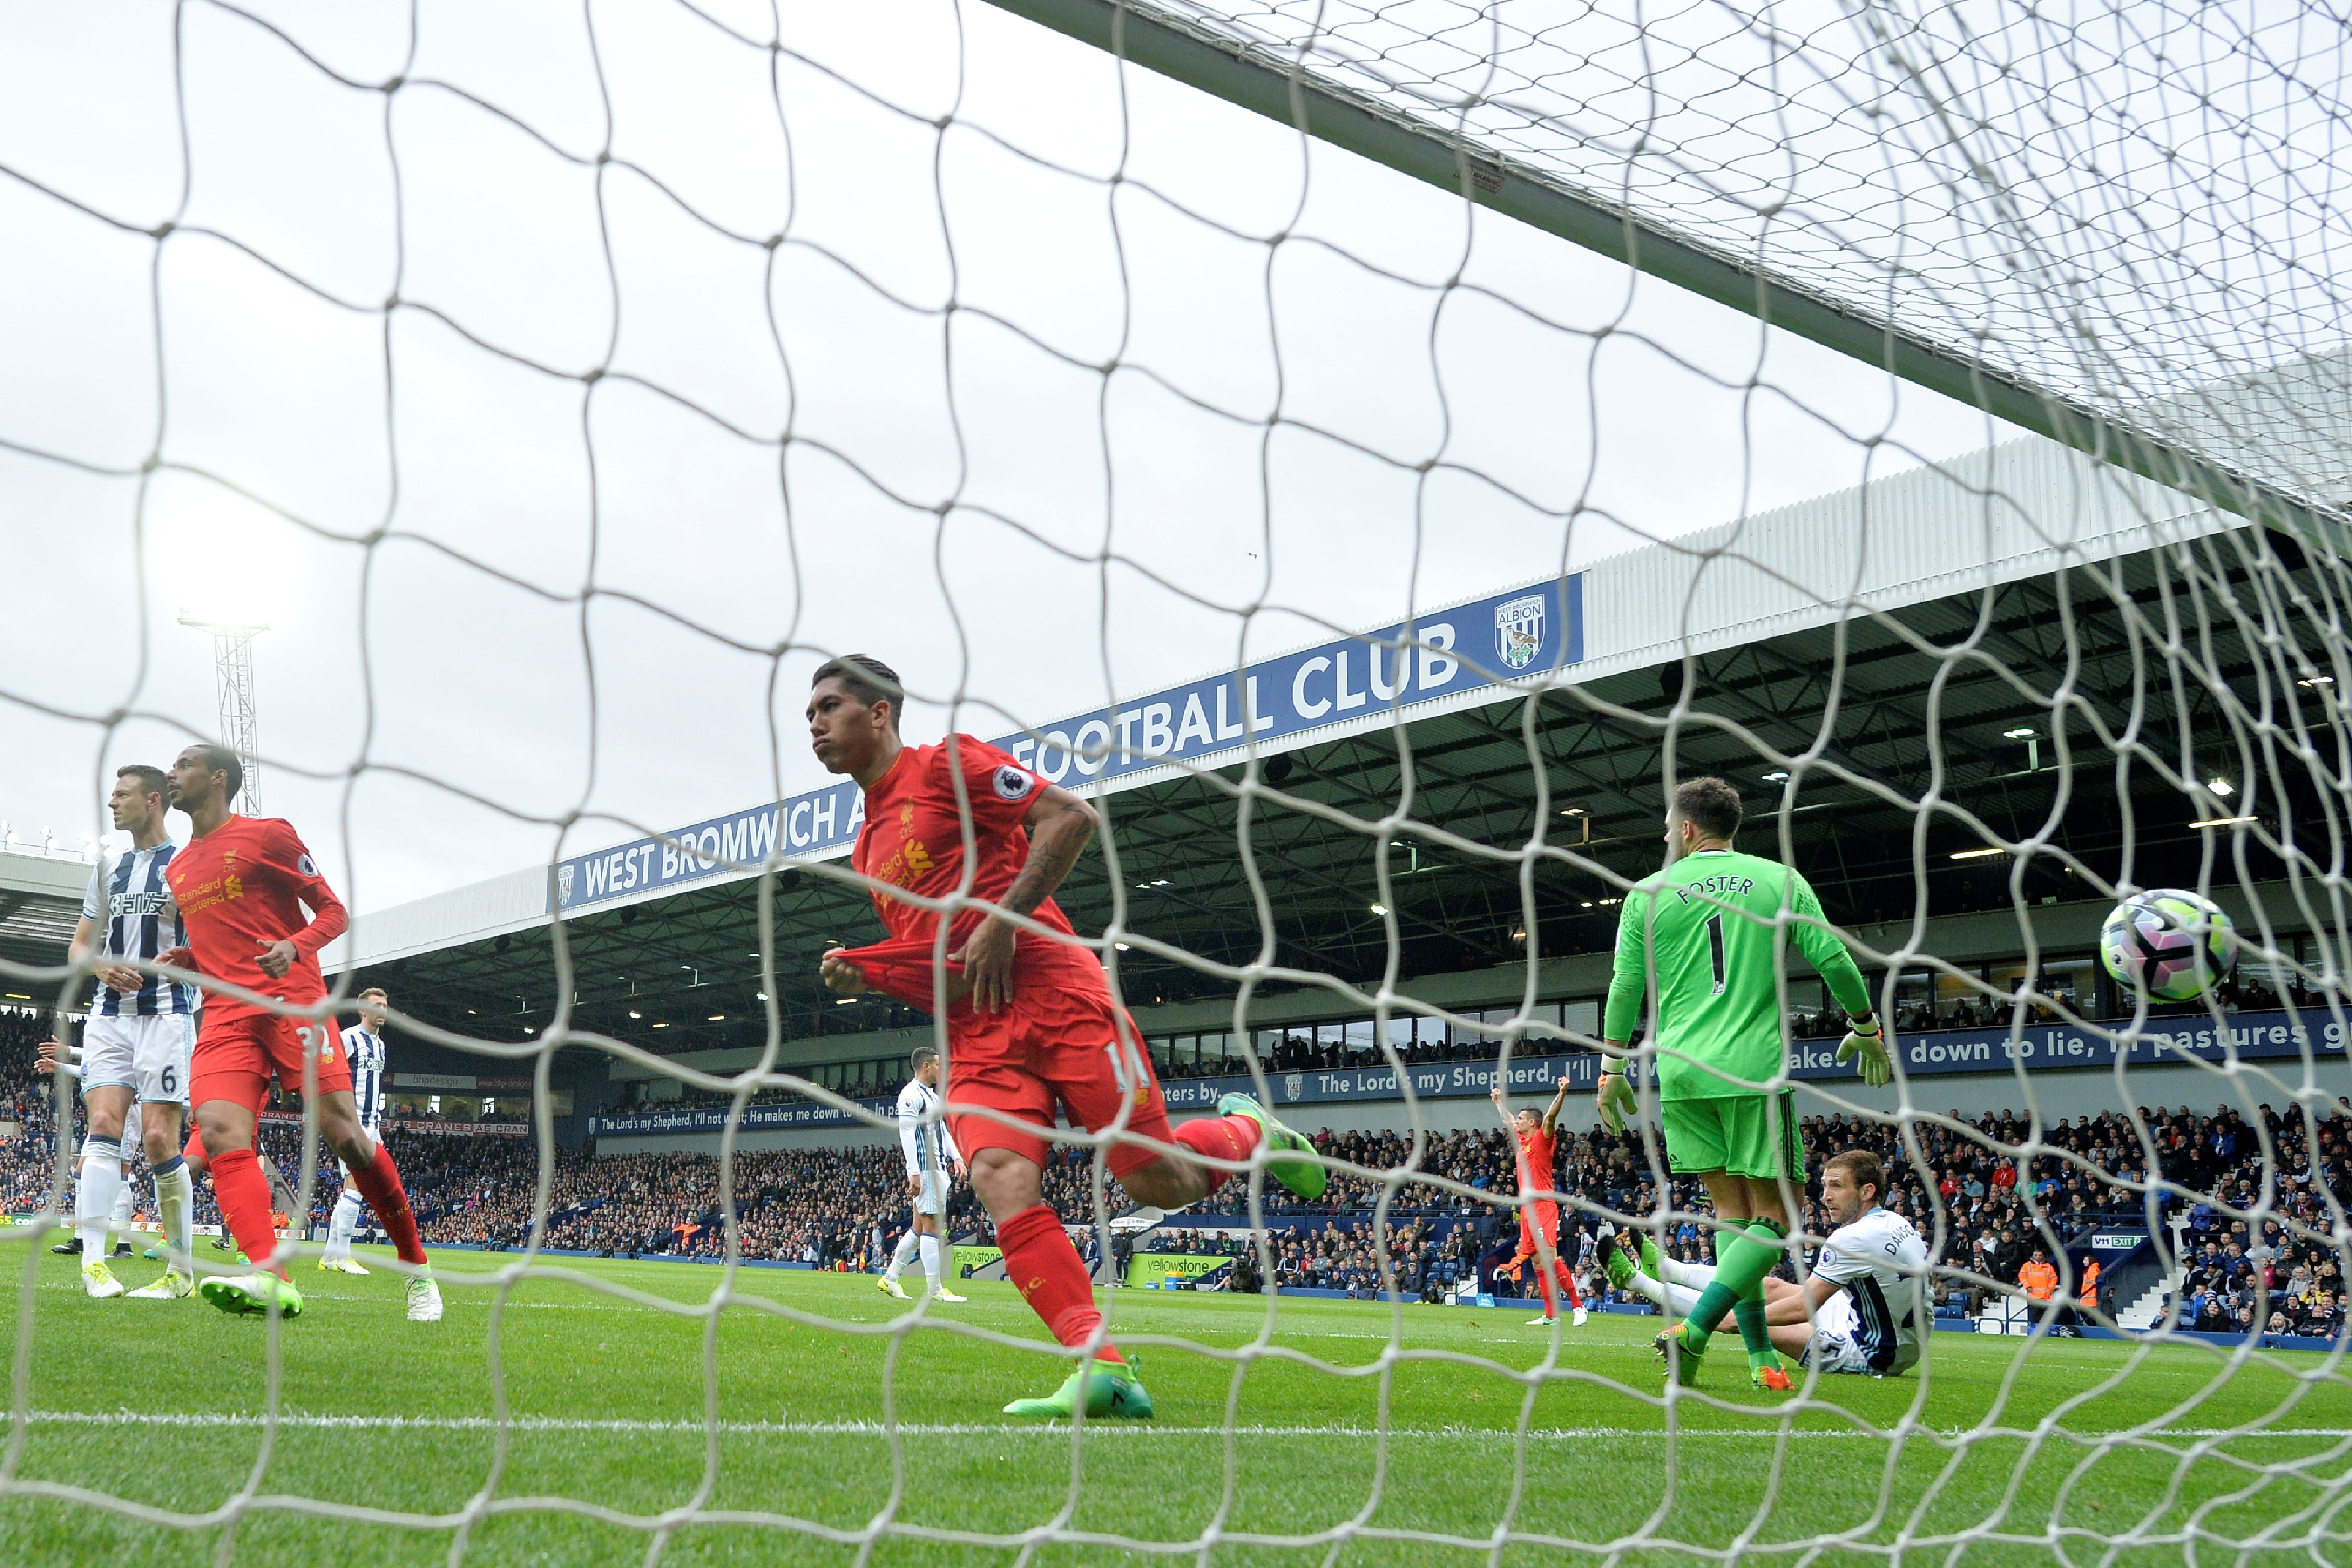 Liverpool's Brazilian midfielder Roberto Firmino (C) celebrates scoring the opening goal past West Bromwich Albion's English goalkeeper Ben Foster (R) during the English Premier League football match between West Bromwich Albion and Liverpool at The Hawthorns stadium in West Bromwich, central England, on April 16, 2017.
 / AFP PHOTO / Justin TALLIS / RESTRICTED TO EDITORIAL USE. No use with unauthorized audio, video, data, fixture lists, club/league logos or 'live' services. Online in-match use limited to 75 images, no video emulation. No use in betting, games or single club/league/player publications.  /         (Photo credit should read JUSTIN TALLIS/AFP/Getty Images)